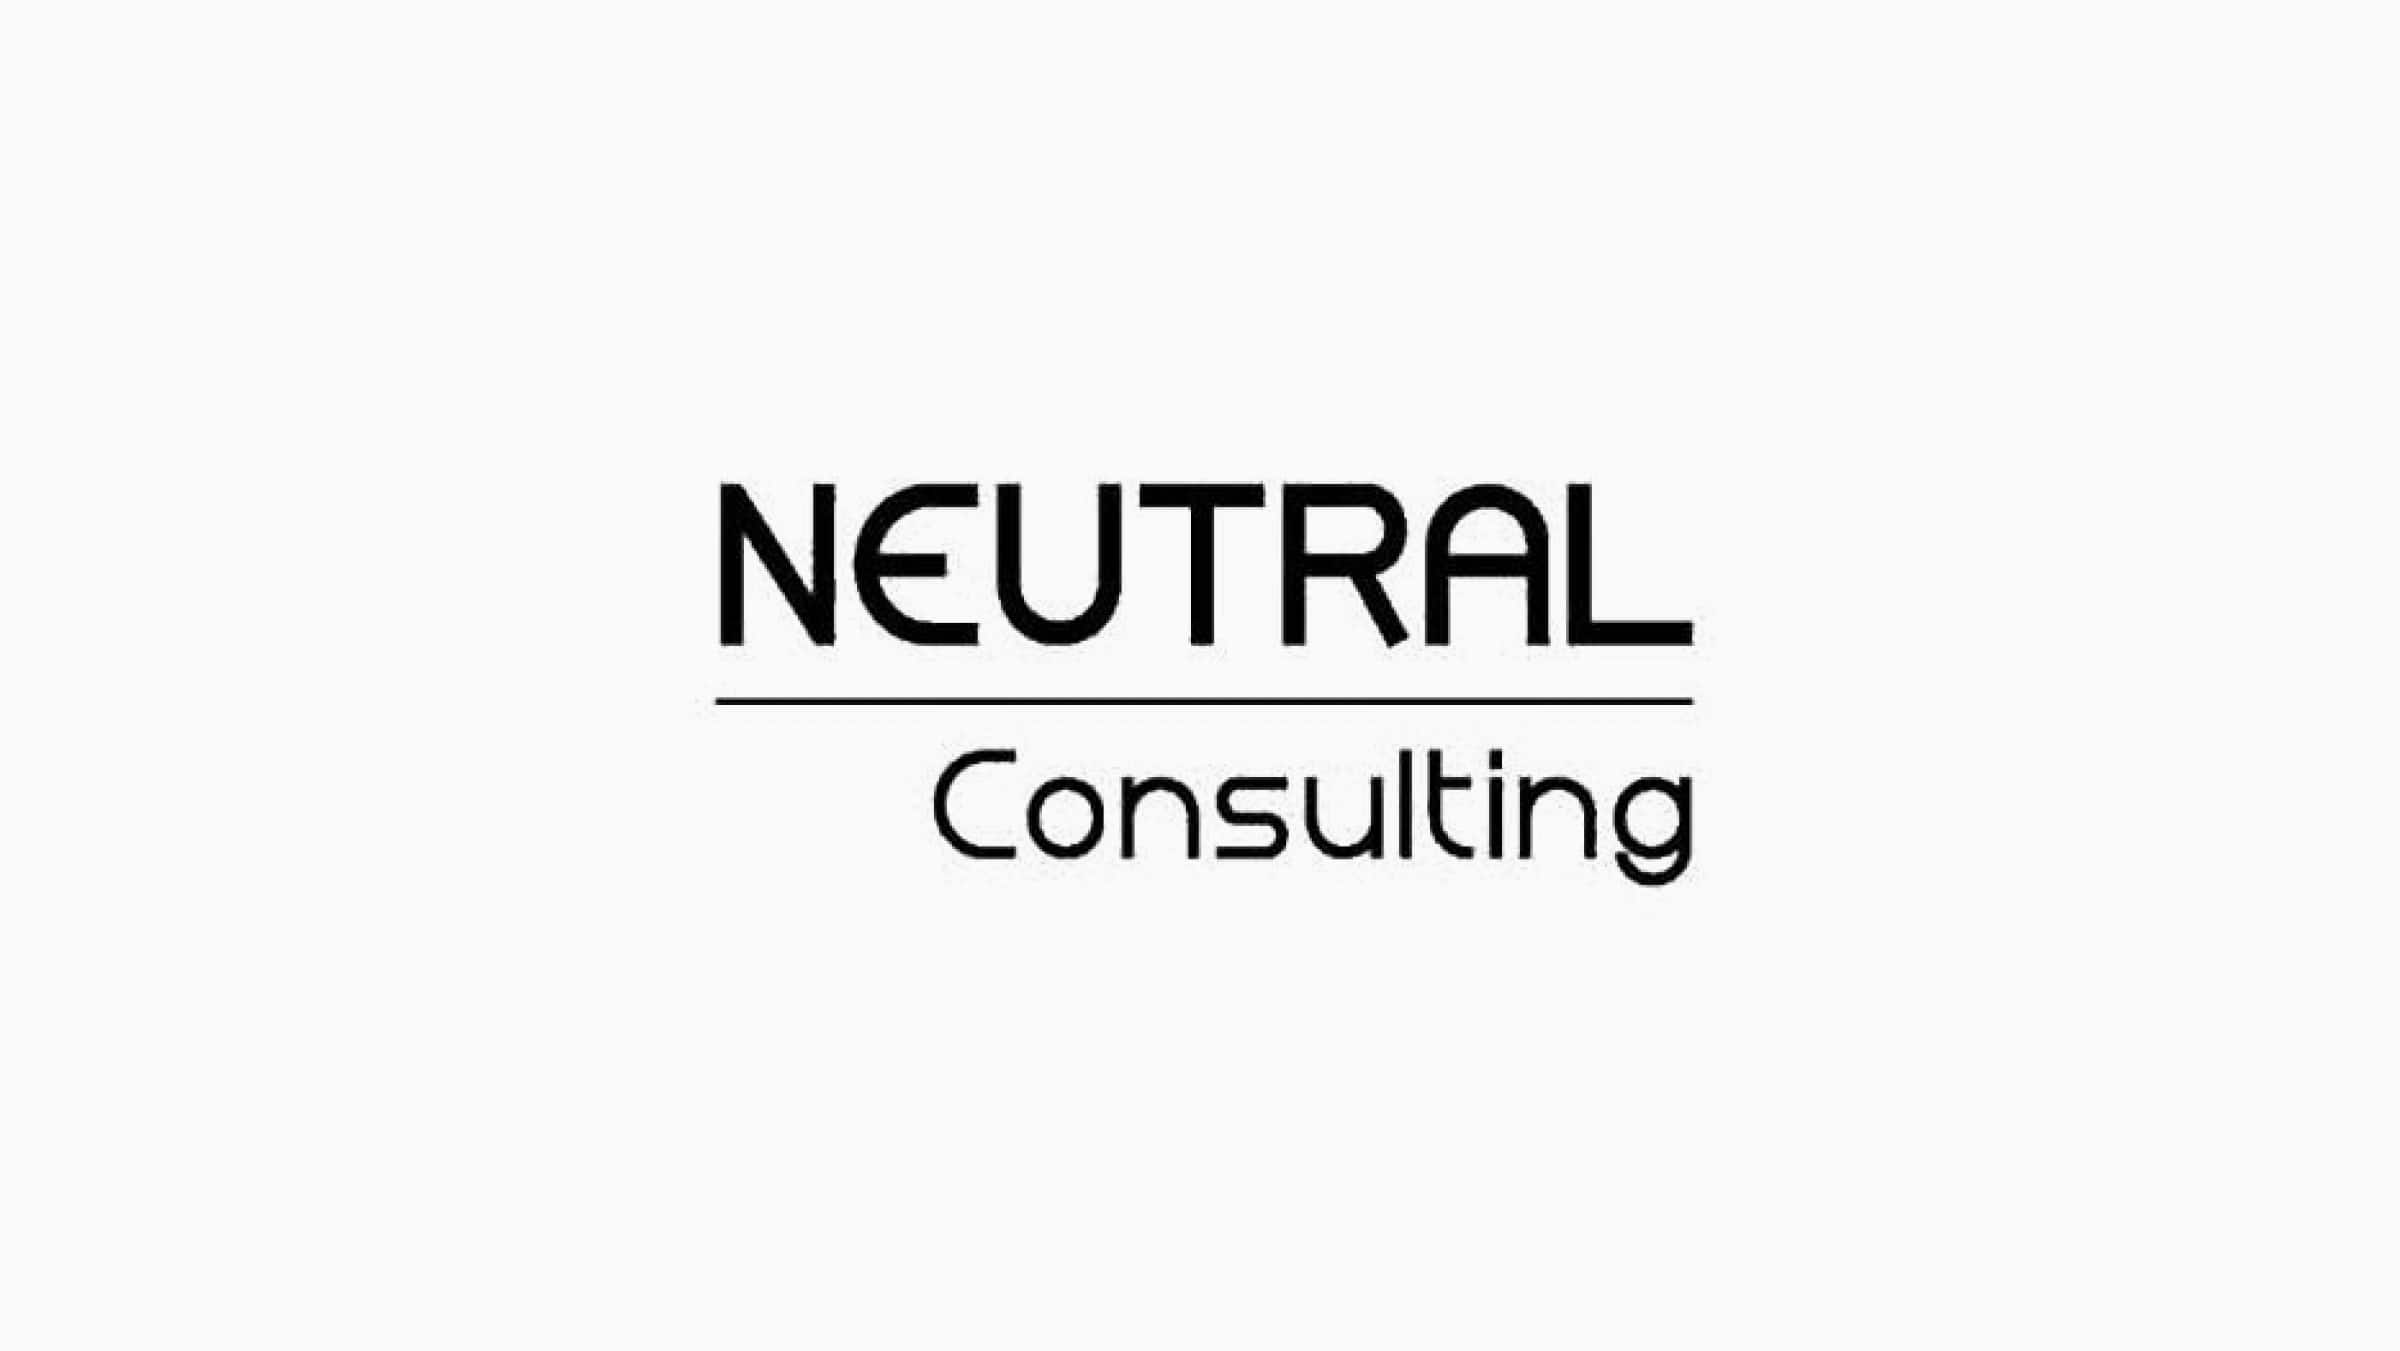 The Neutral Consulting logo